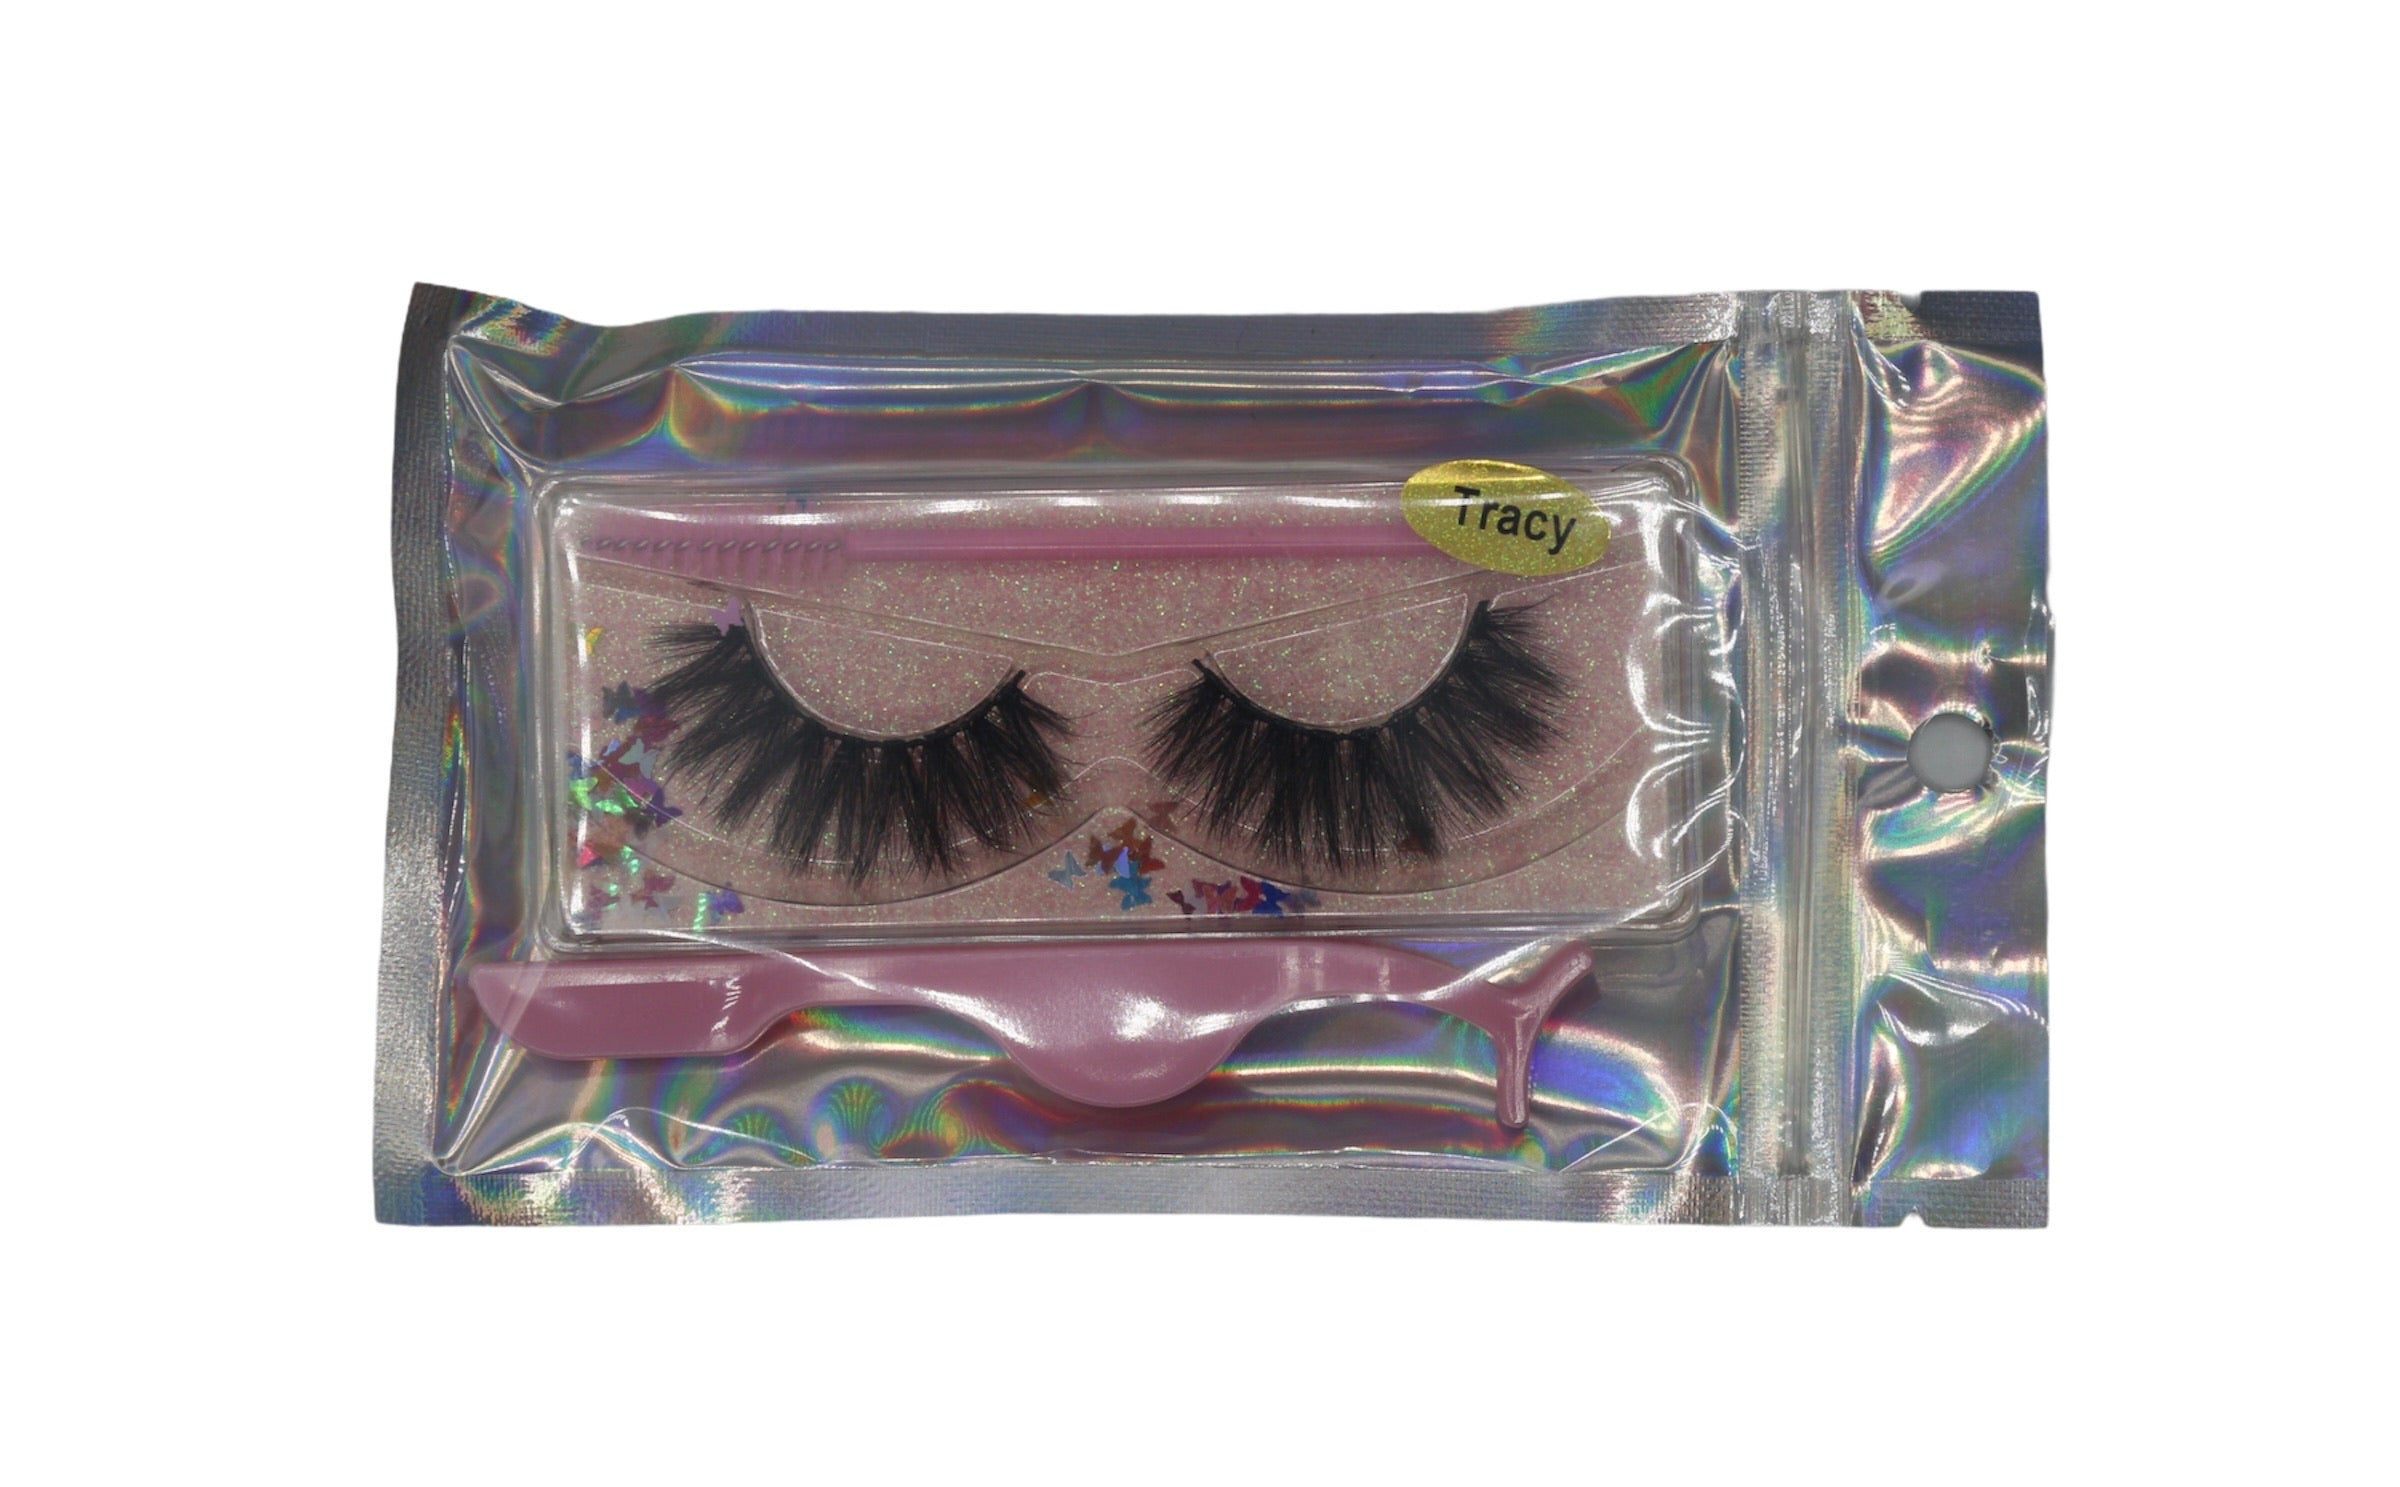 HOLOGRAPHIC LASHES